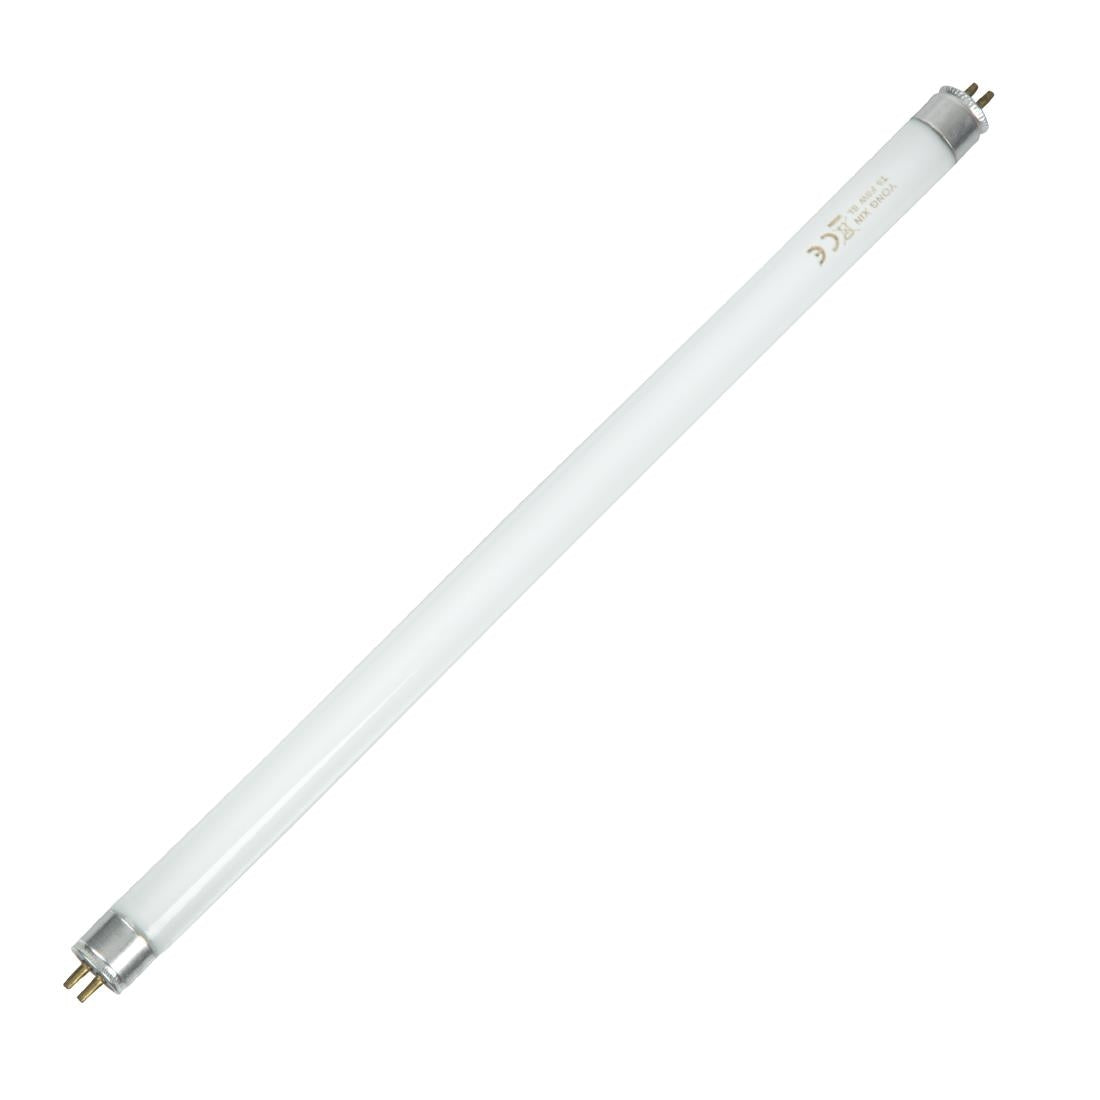 Eazyzap Fly Killer Replacement Fluorescent Bulb 8W JD Catering Equipment Solutions Ltd